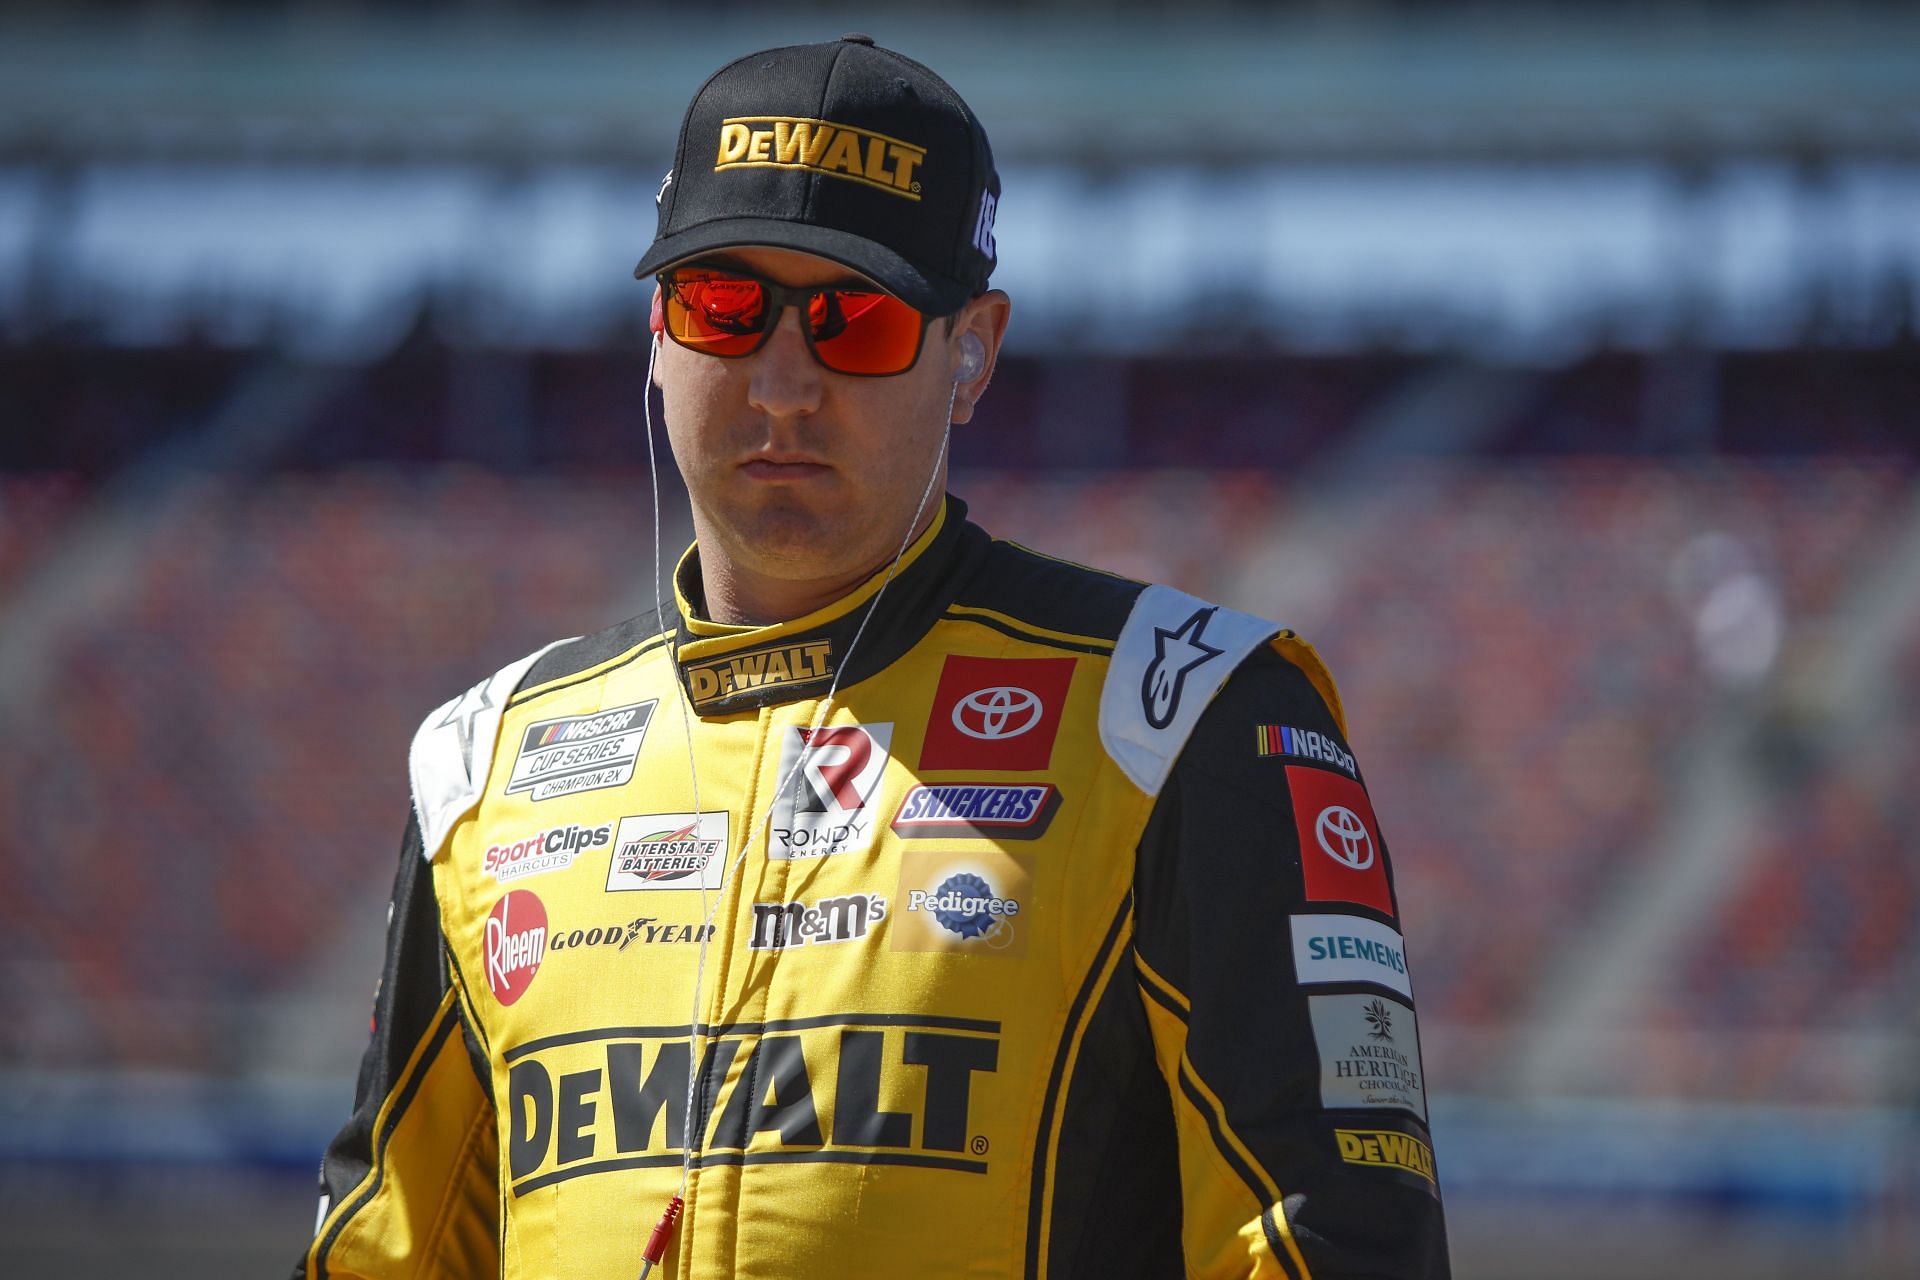 Kyle Busch waits on the grid during practice for the Ruoff Mortgage 500 at Phoenix Raceway.